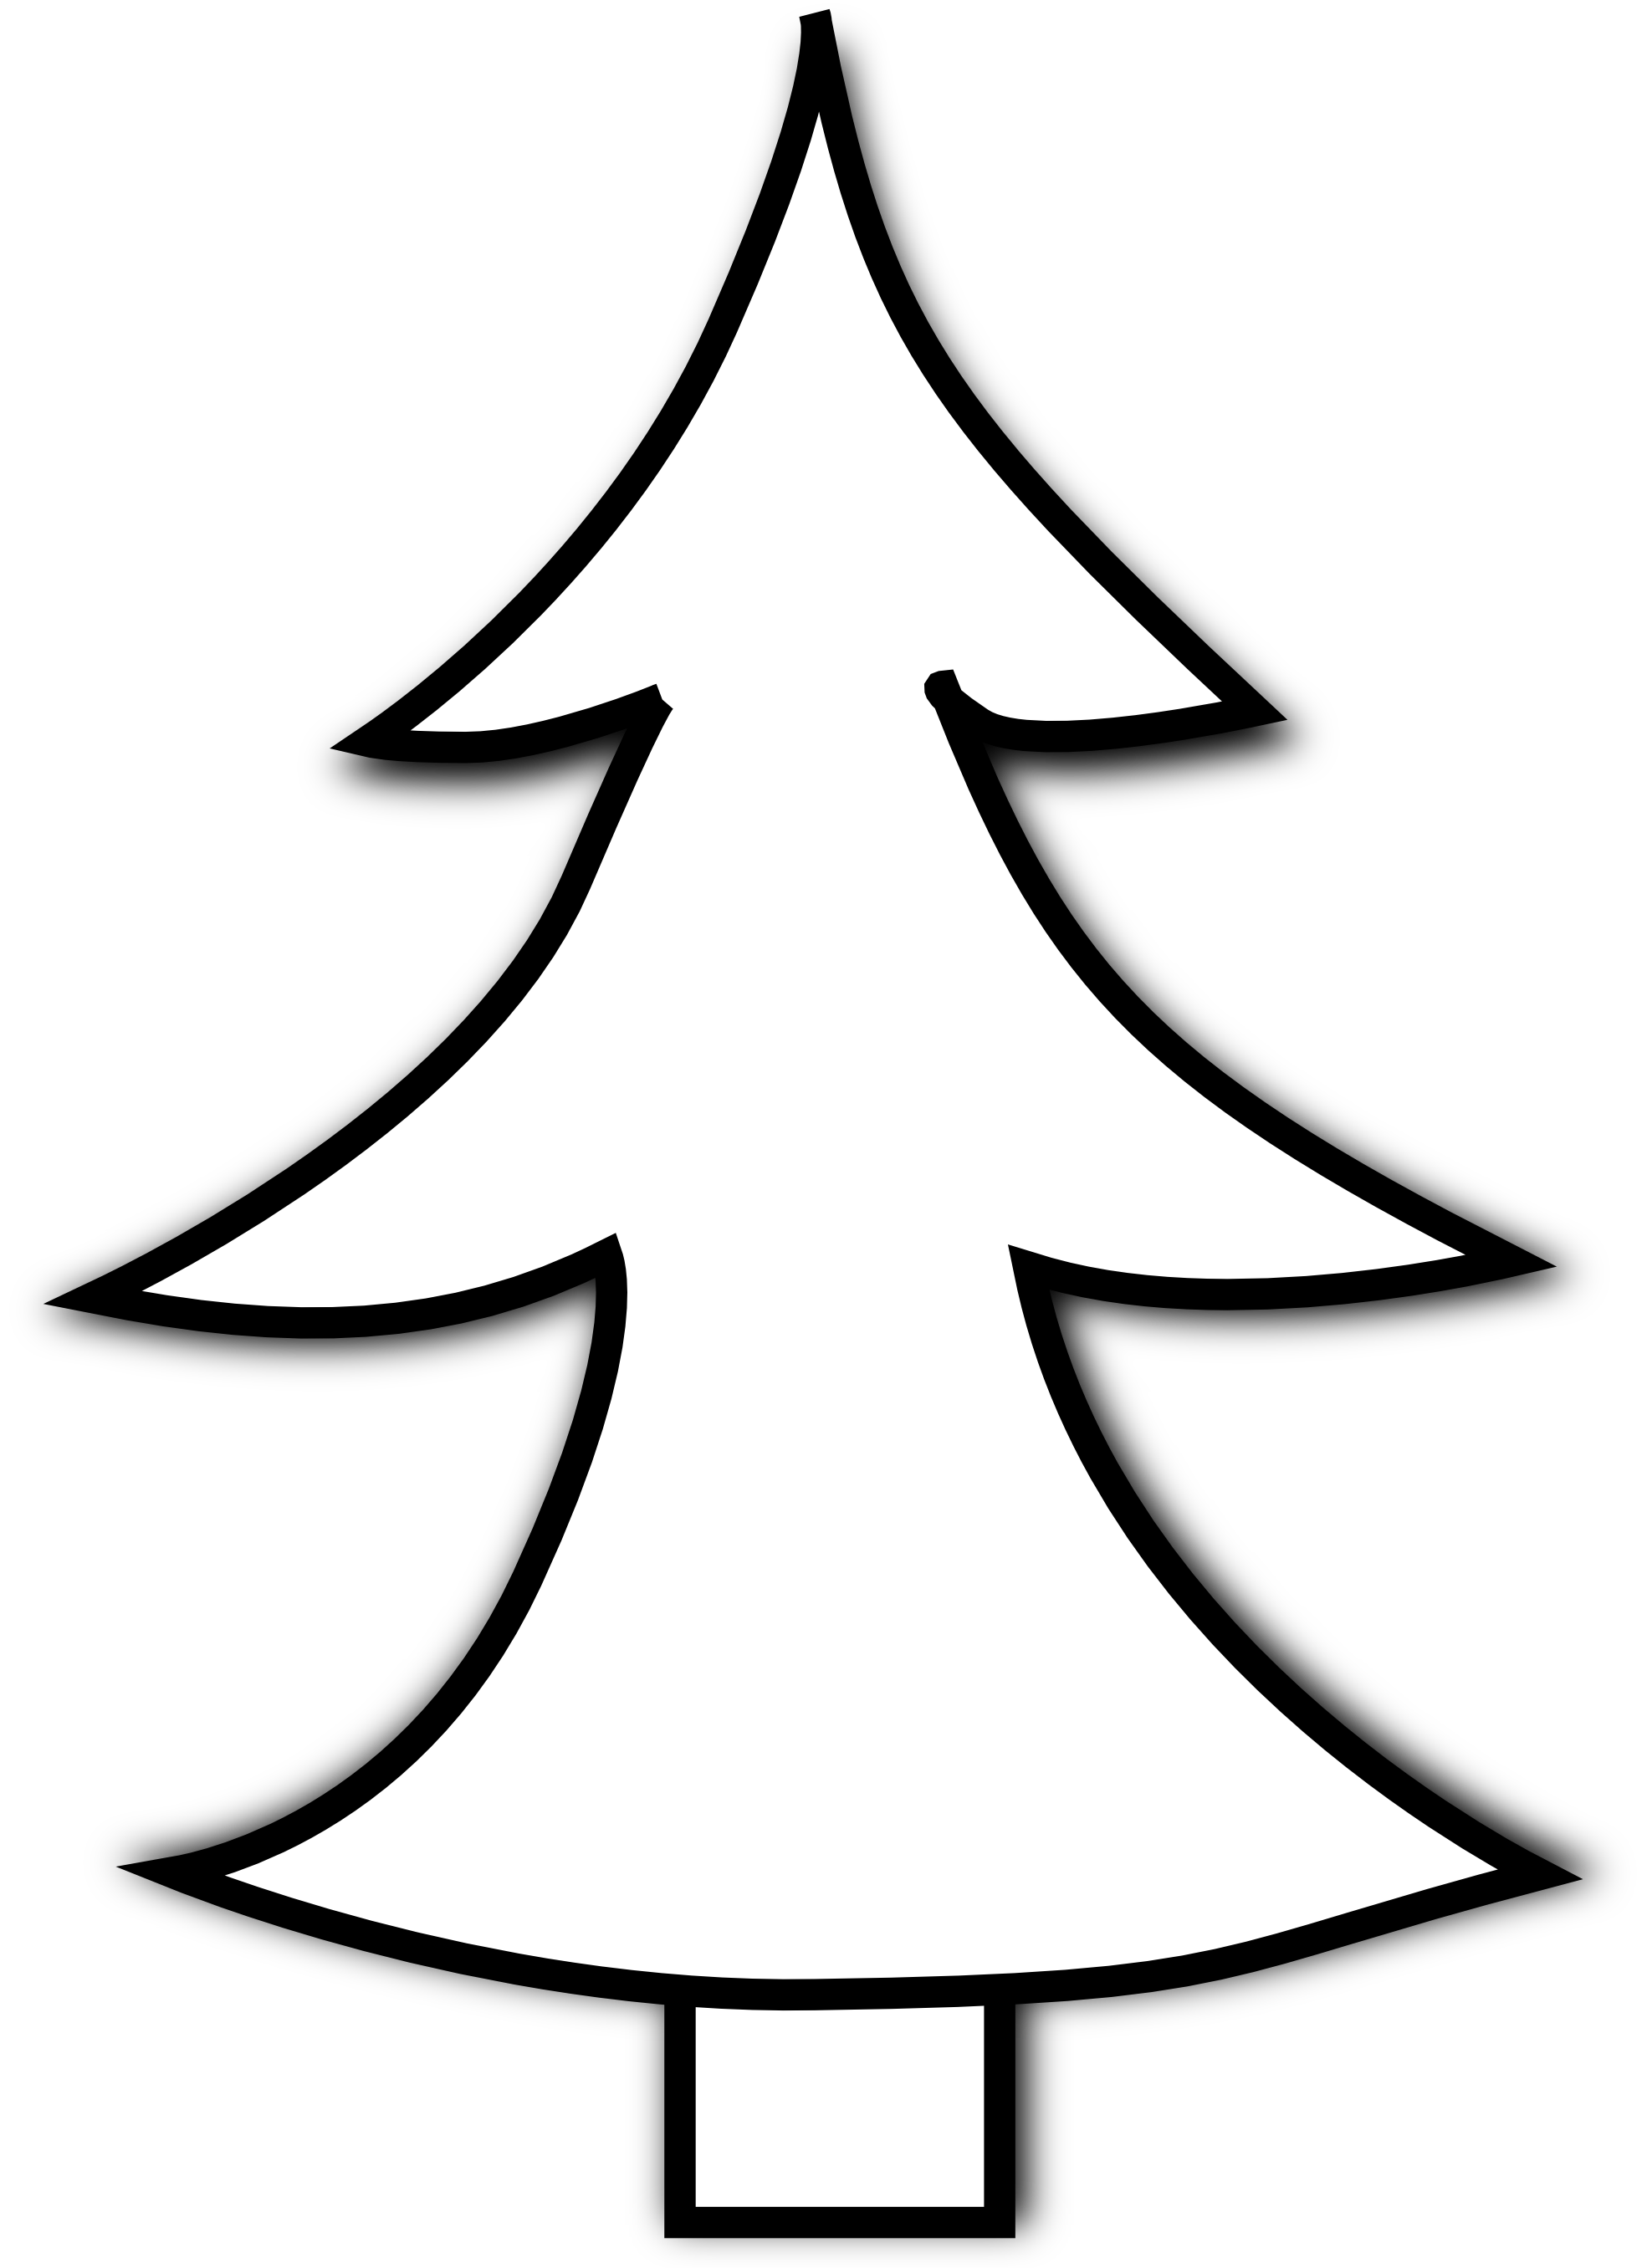 judge clipart black and white christmas